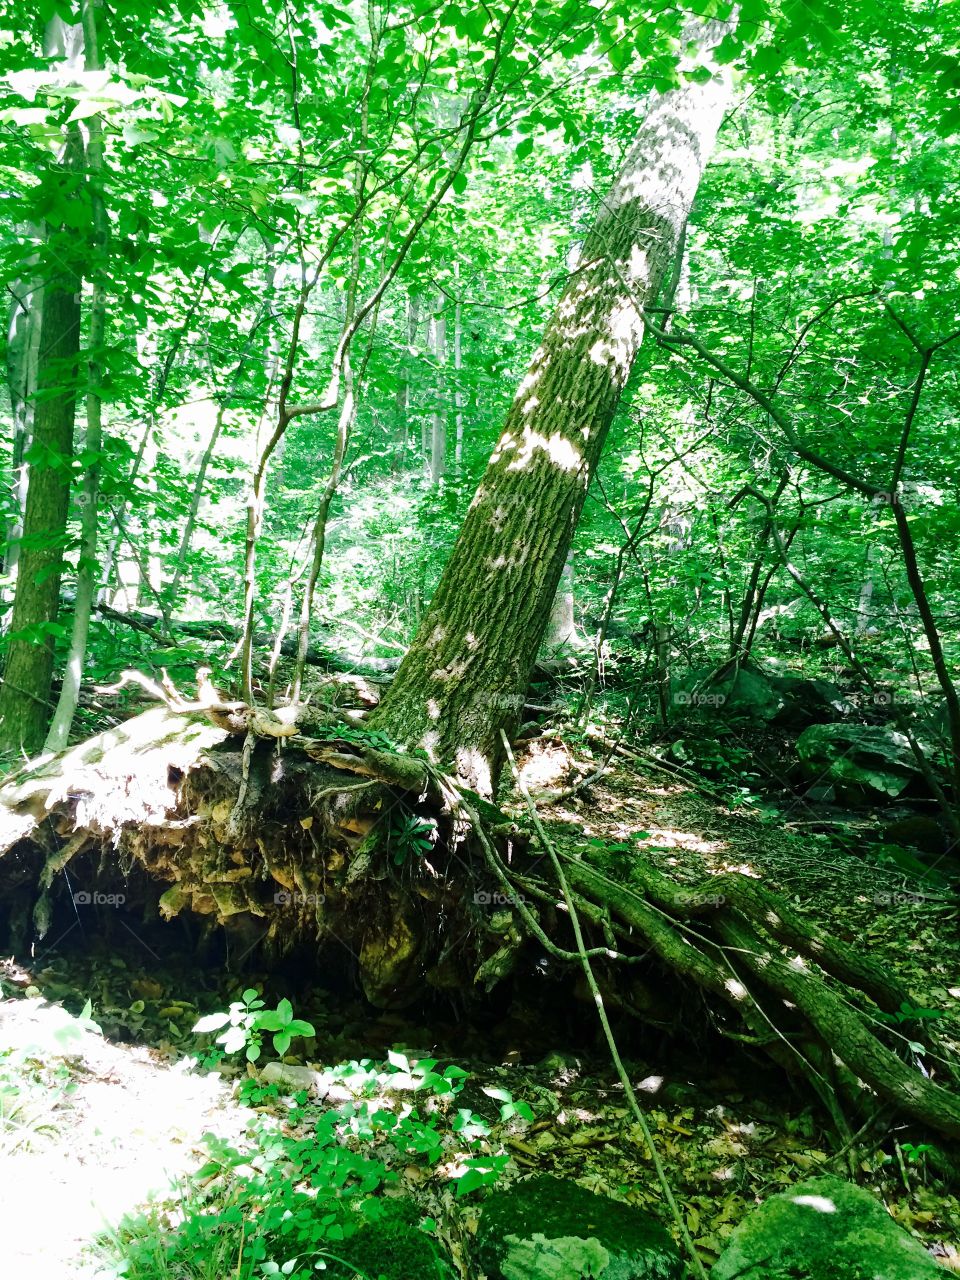 Uprooted tree